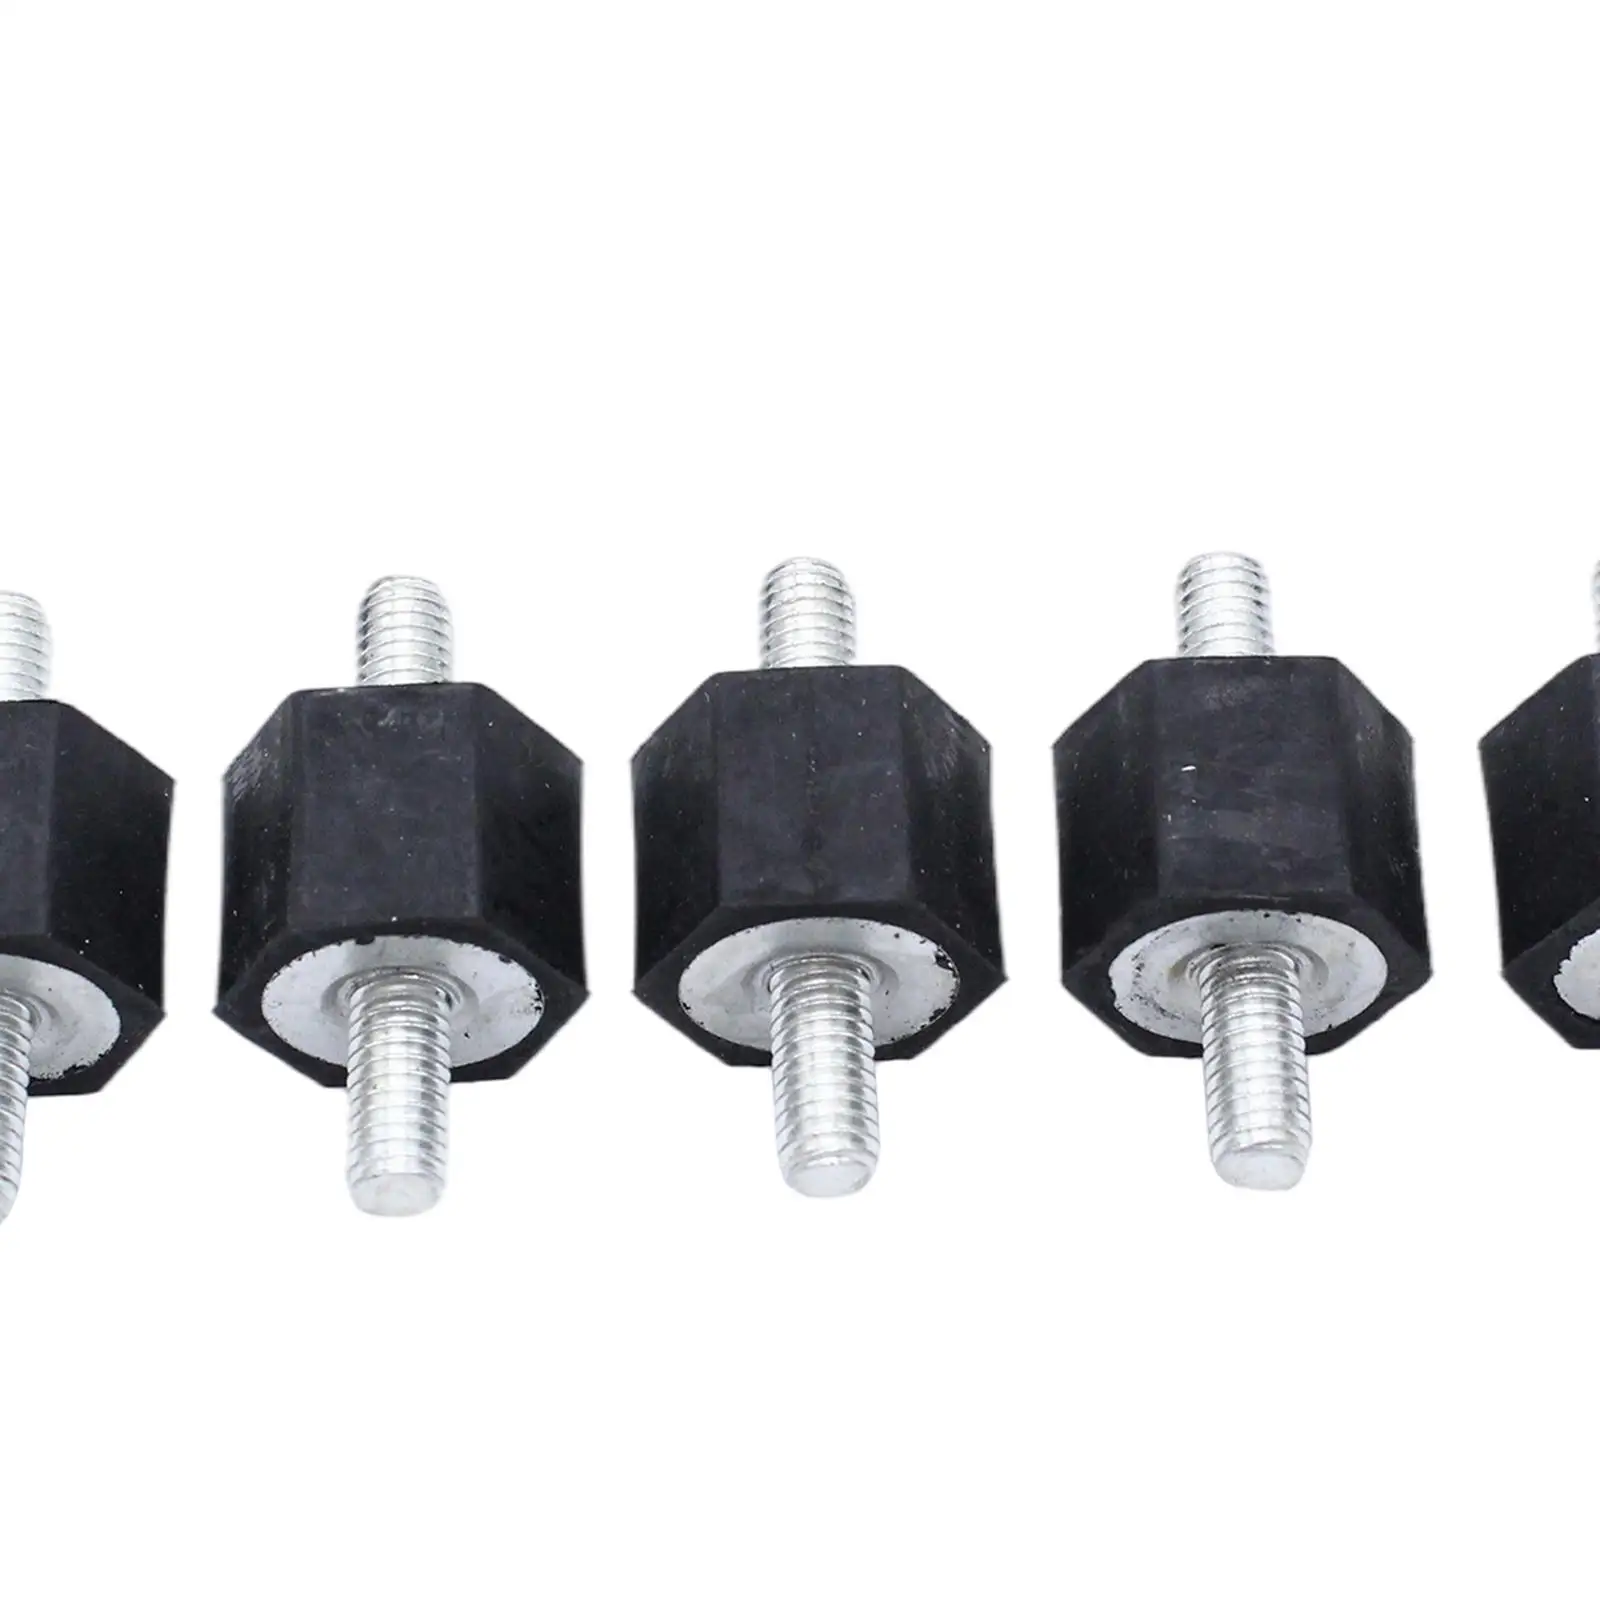 5Pcs Fuel Pump Engine Cover Rubber Mounts Isolator Mounts Anti Vibration for Golf MK2 for B4 Cover Mounting Oil Coolers